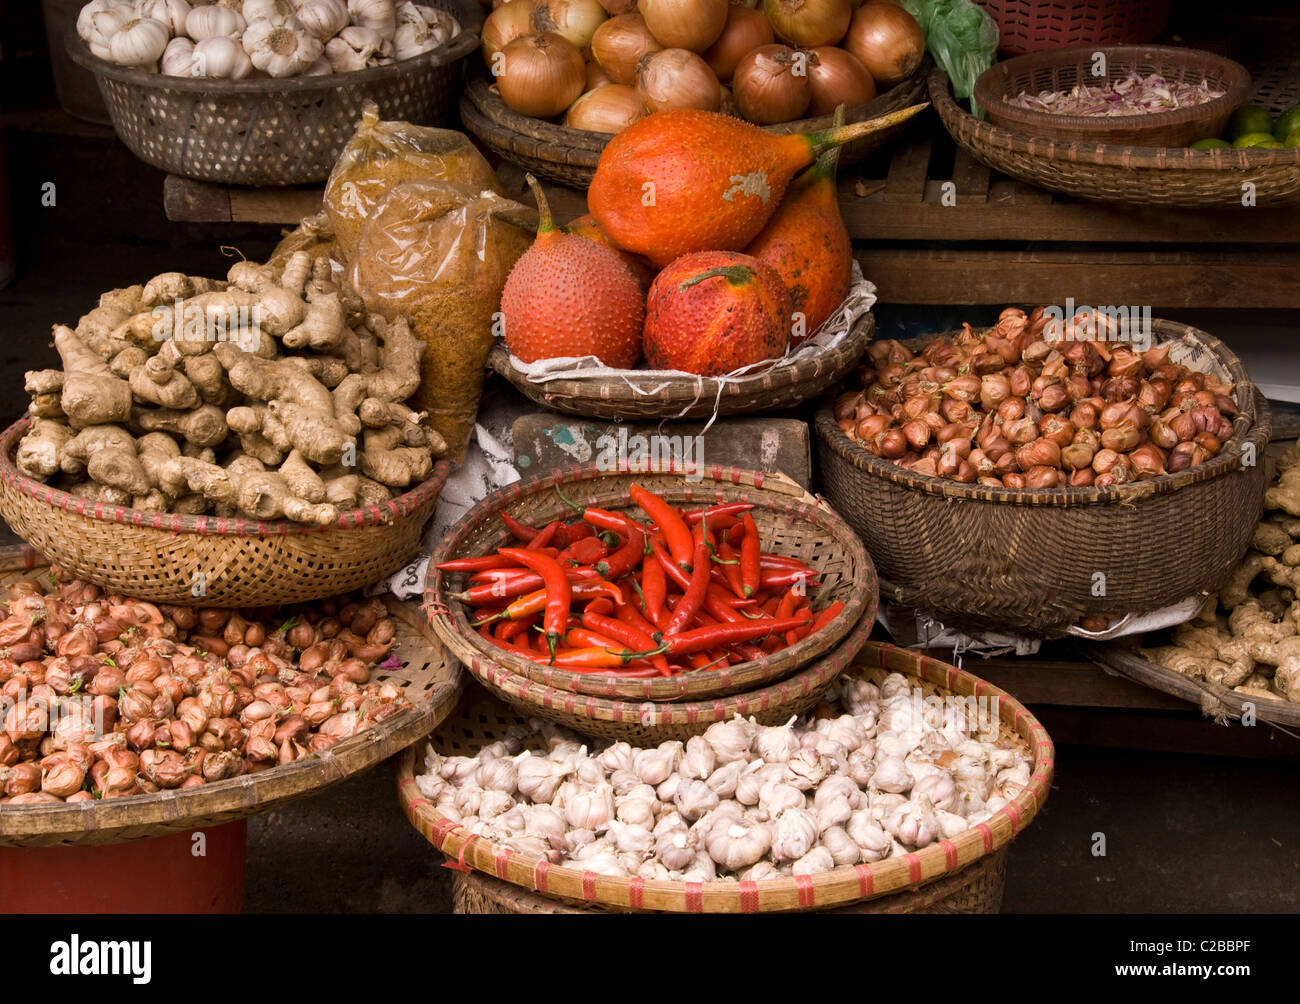 Baskets of gac fruit, chilli, onions, shallots, ginger and garlic at a market in the Hanoi Old Quarter, Viet Nam Stock Photo